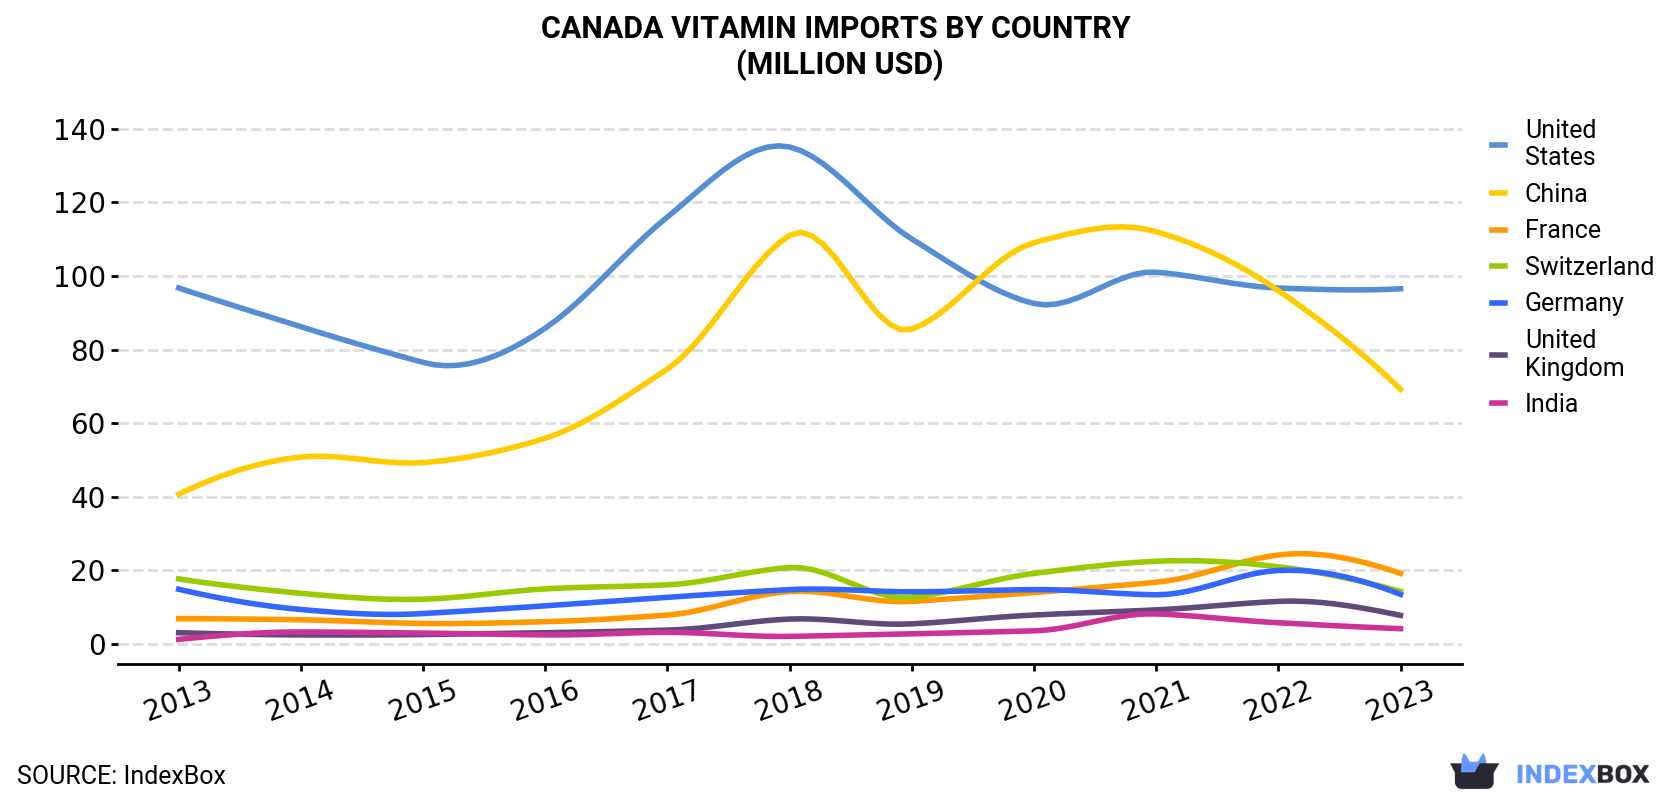 Canada Vitamin Imports By Country (Million USD)